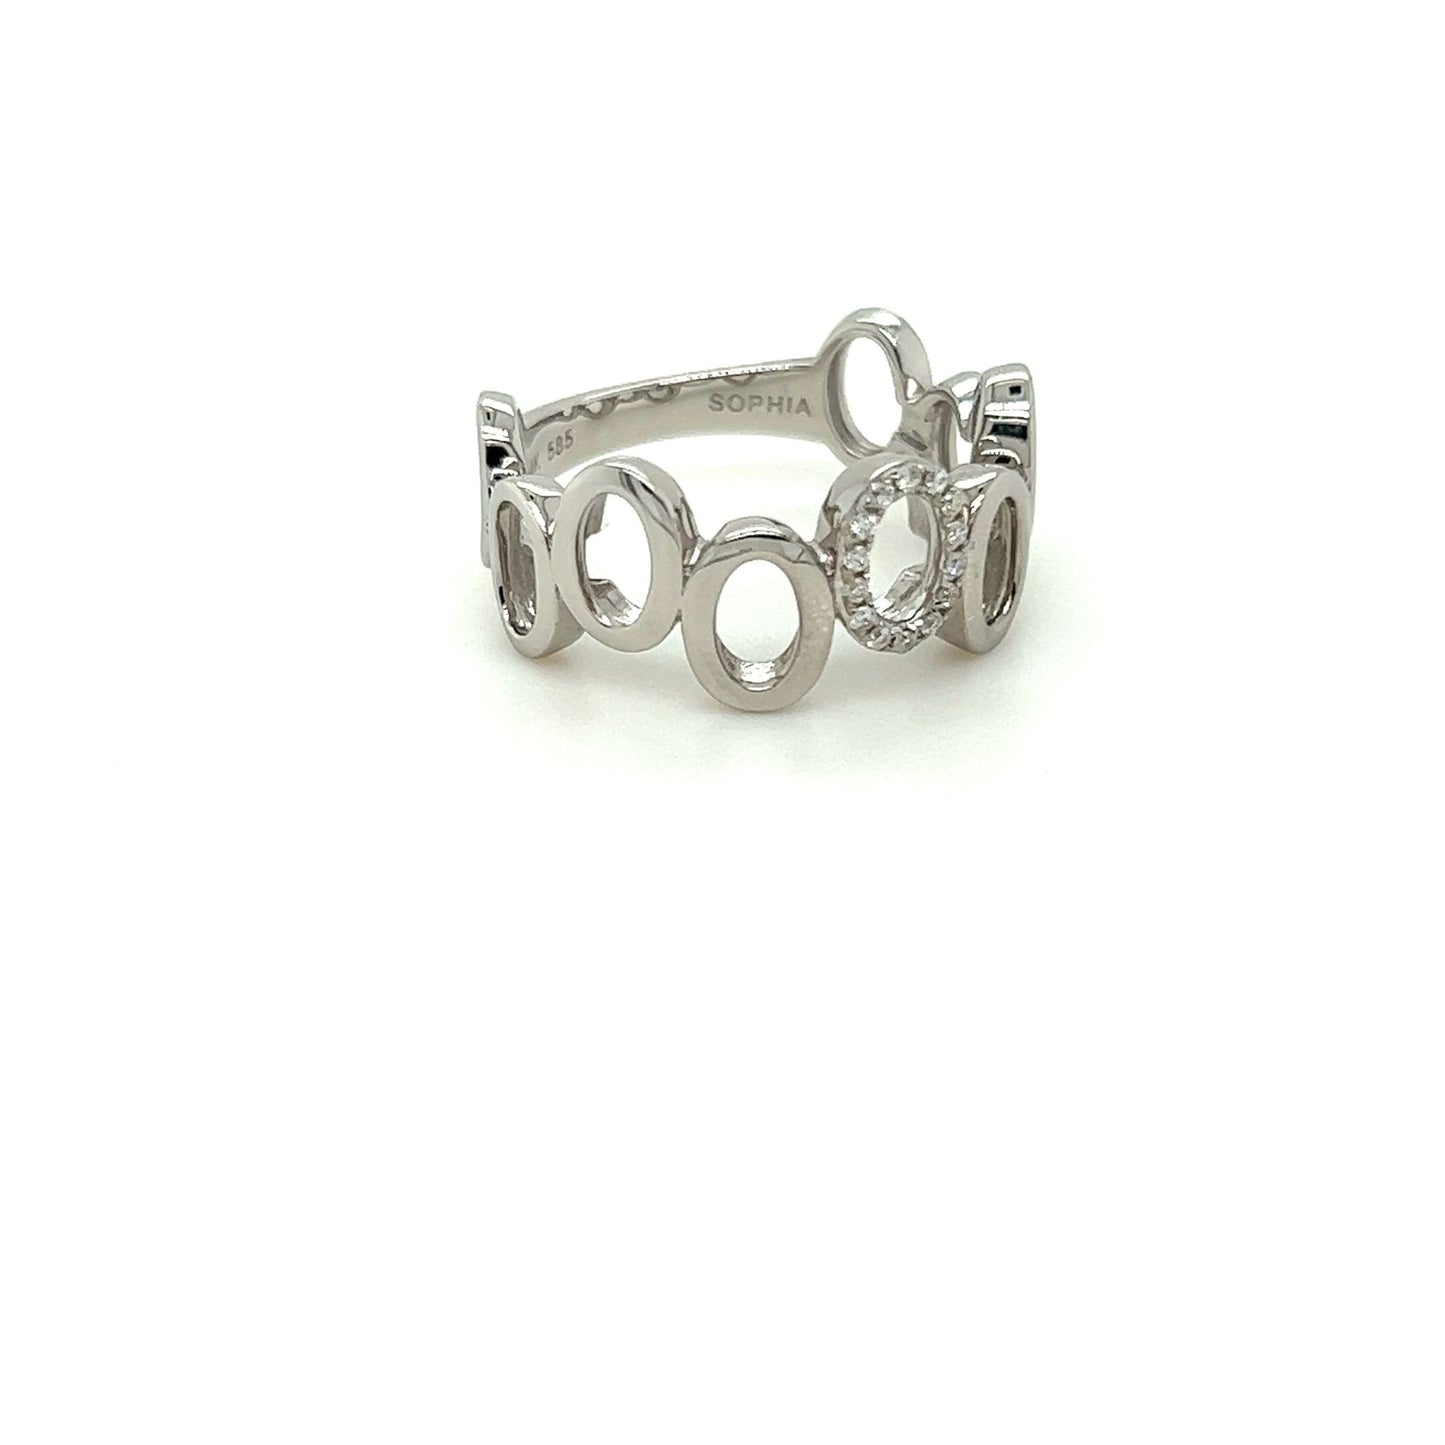 14kt White Gold "O" Ring with Diamond Accents